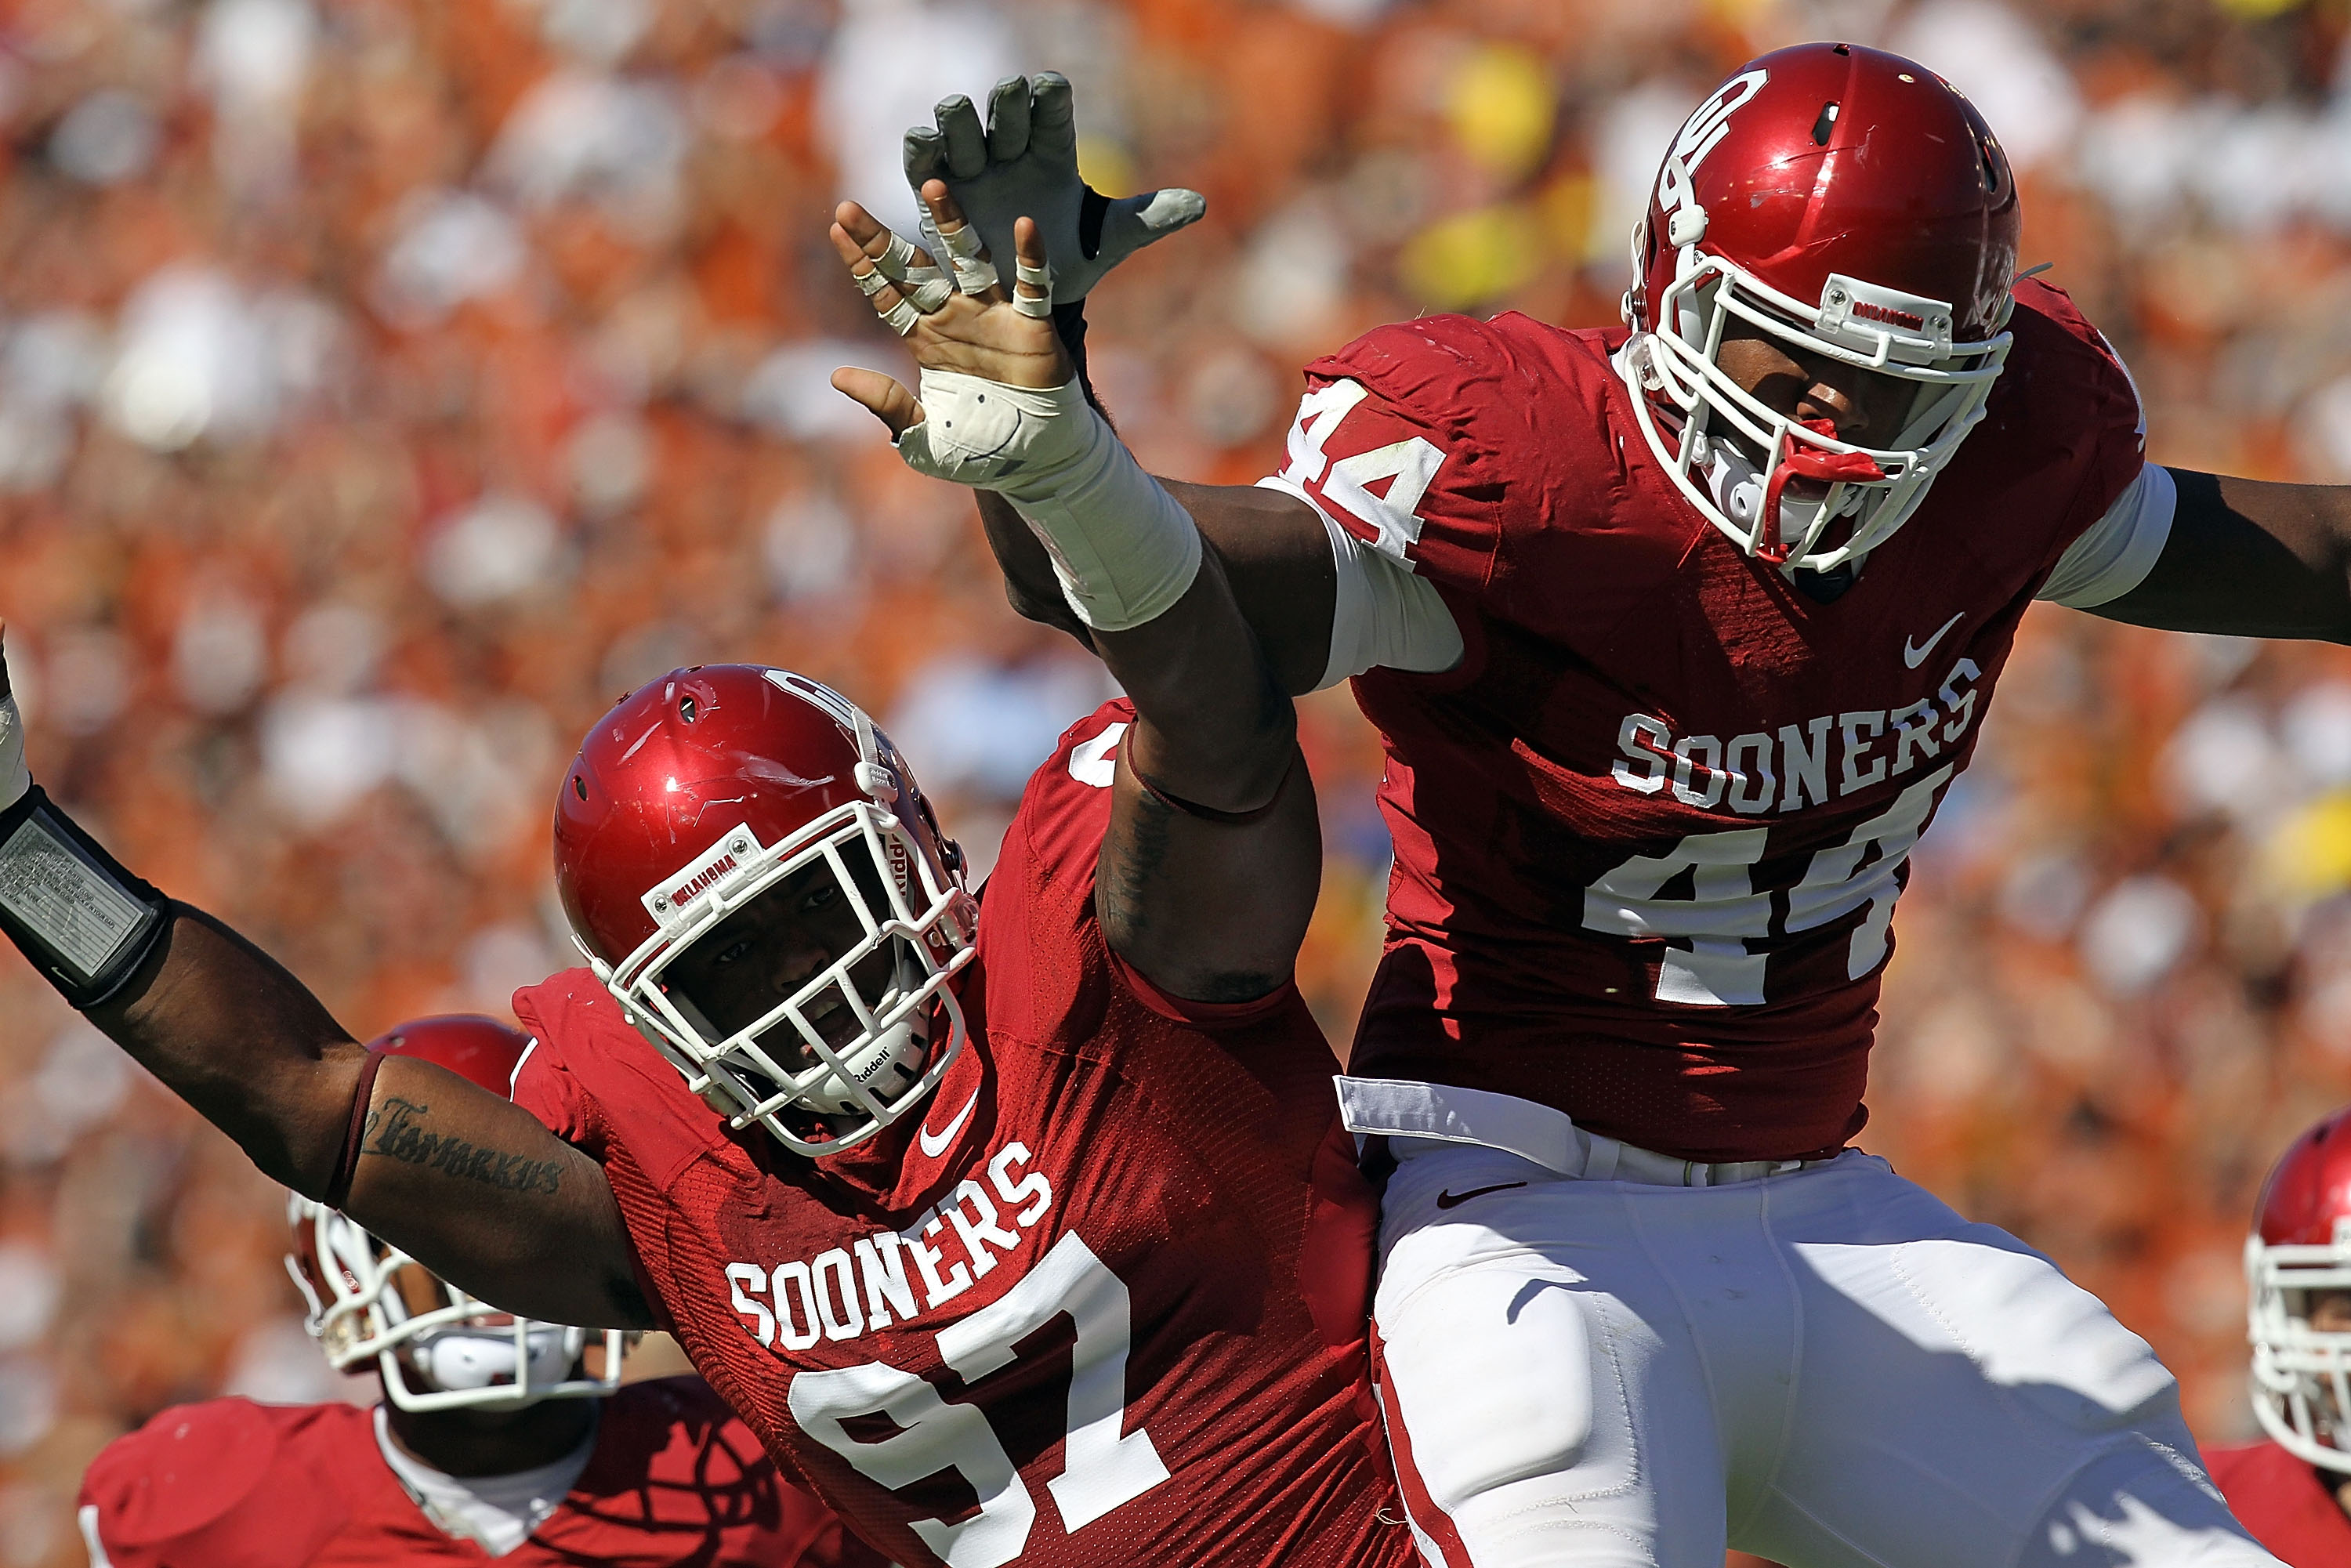 DALLAS - OCTOBER 02:  Jeremy Beal #44 and Jamarkus McFarland #97 of the Oklahoma Sooners celebrate a quarterback sack against the Texas Longhorns in the first quarter at the Cotton Bowl on October 2, 2010 in Dallas, Texas.  (Photo by Ronald Martinez/Getty